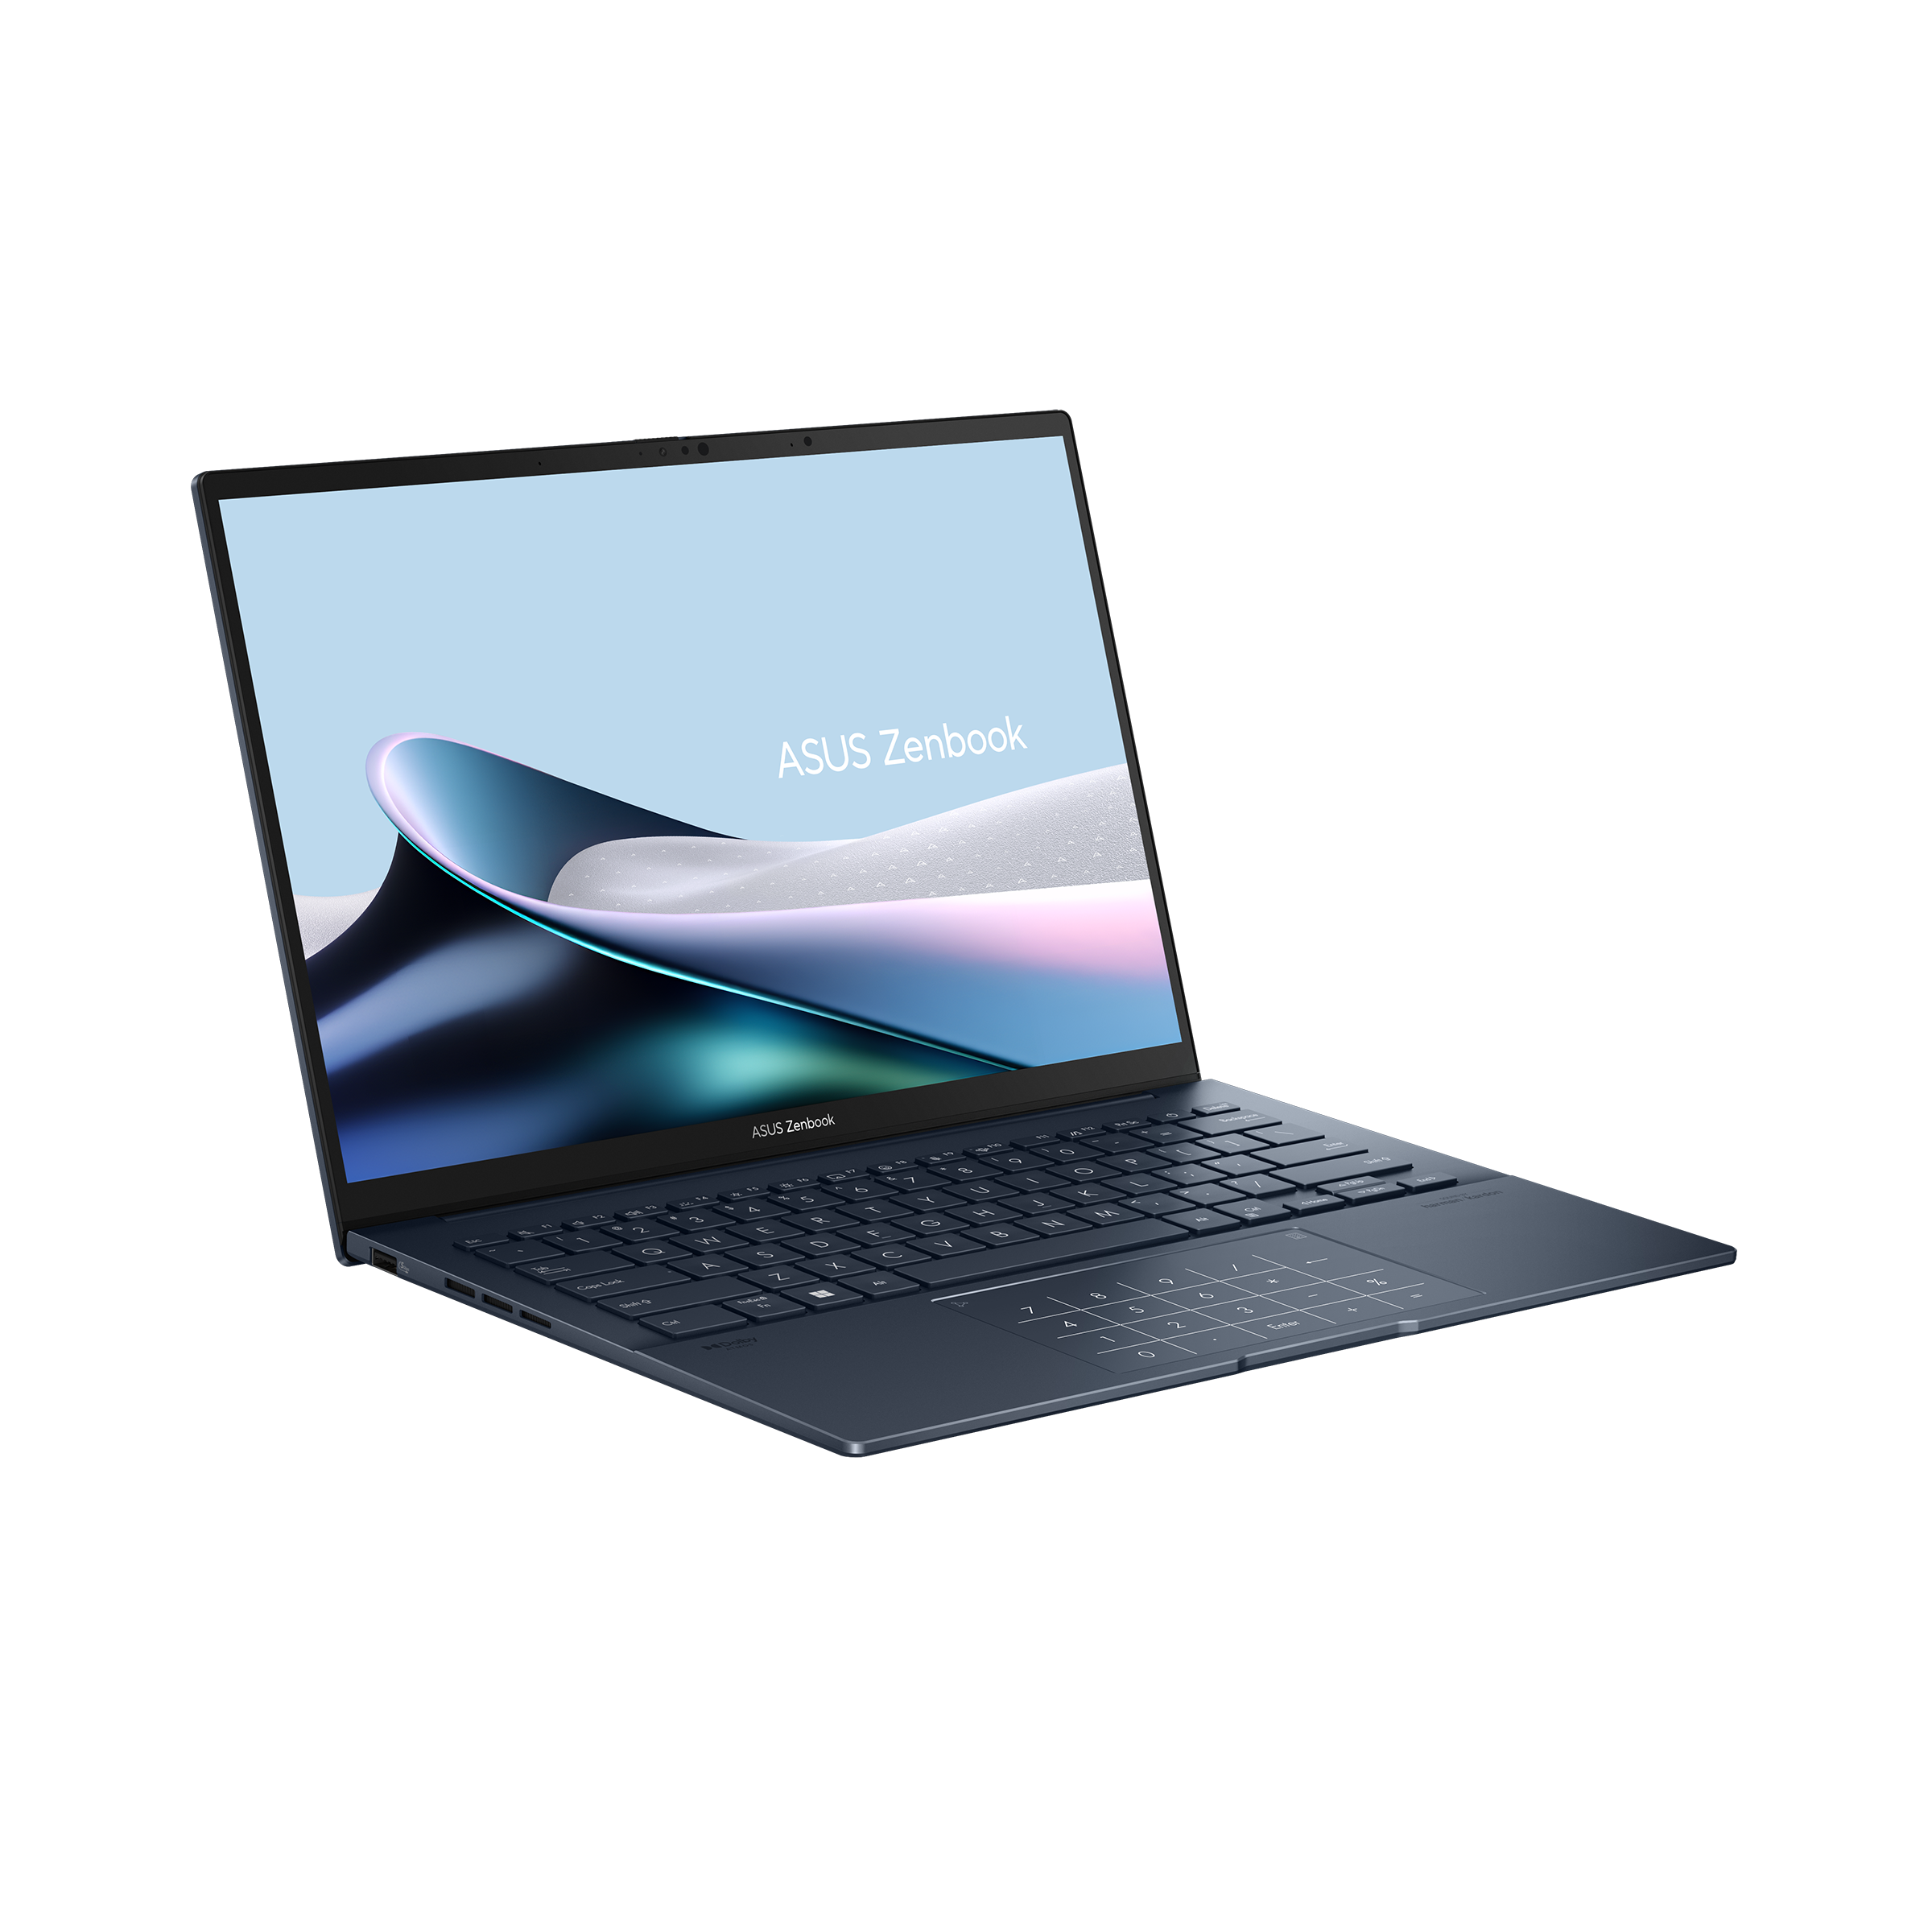 Specs and Info] ASUS ZenBook 14 OLED - next level power efficiency